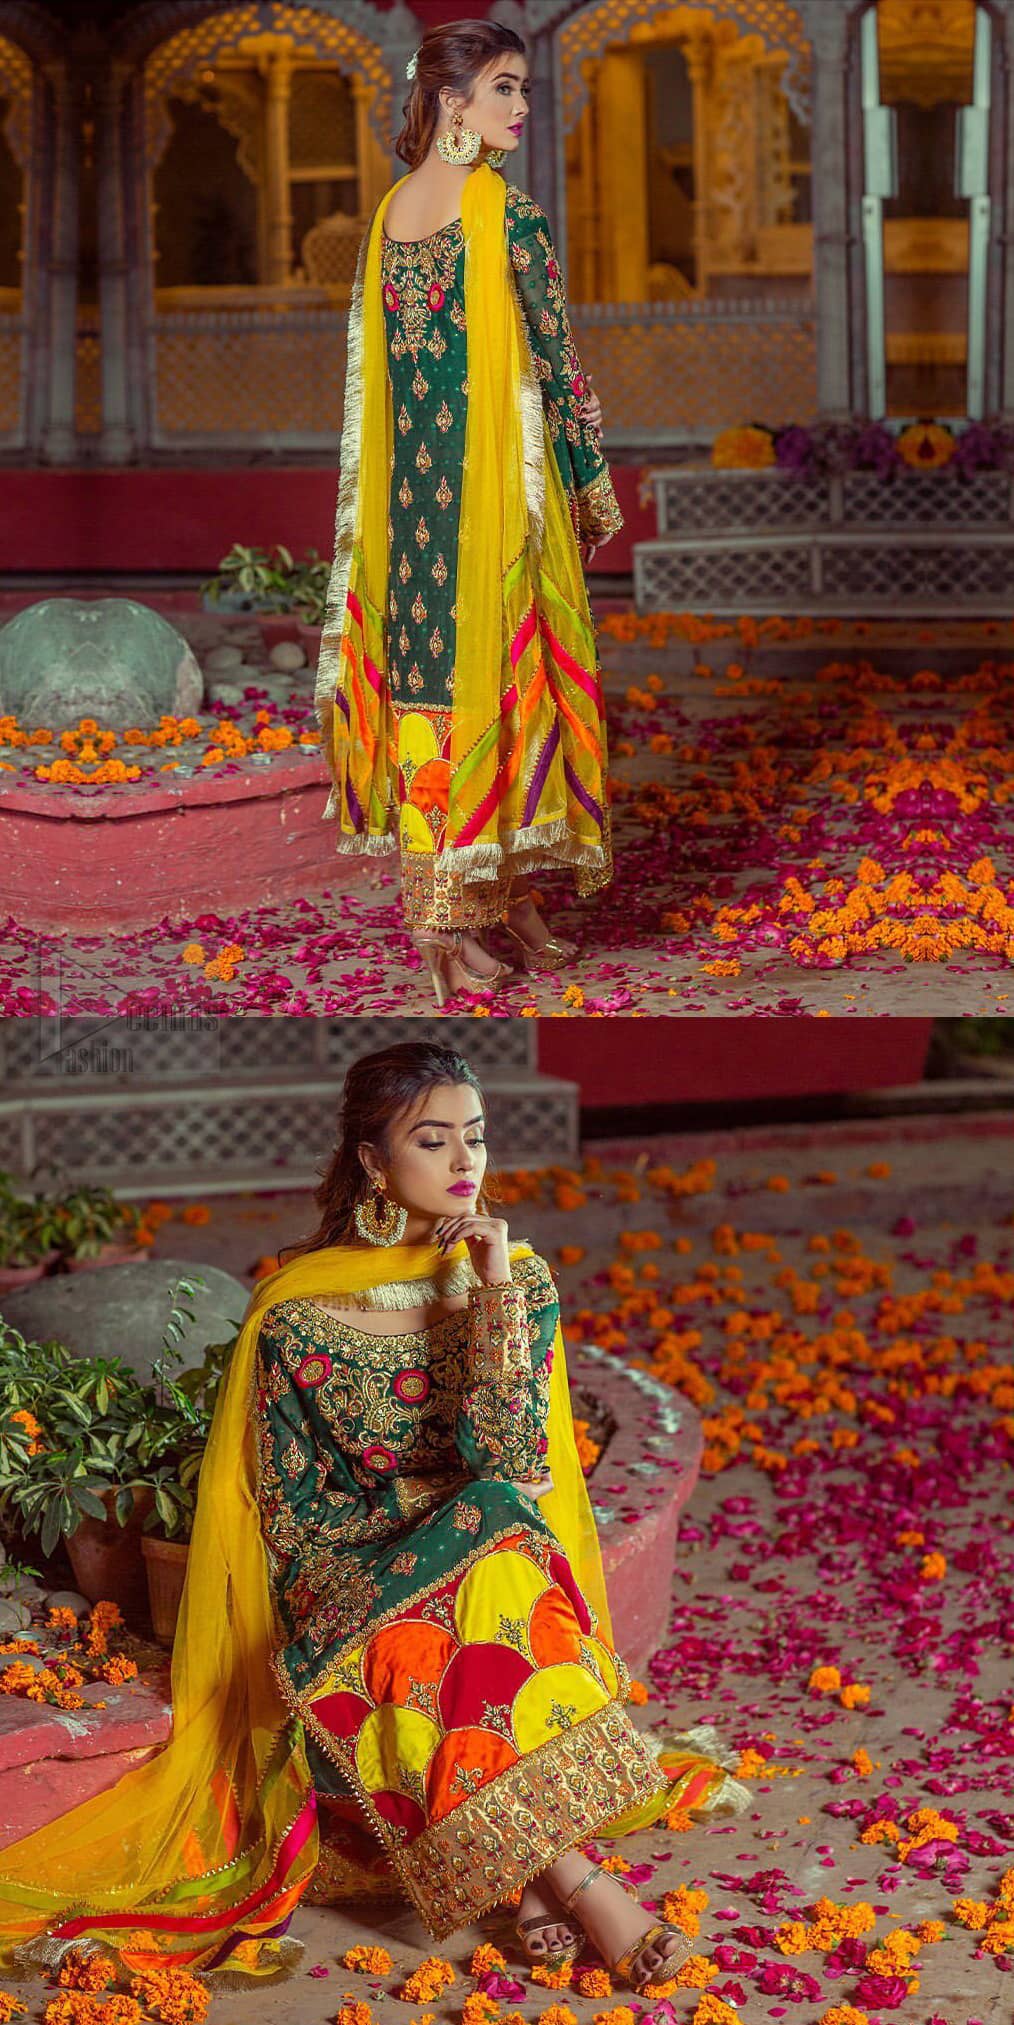 Beautifully elegant with a modern twist. This beautiful outfit comes with bottle green long shirt and colorful applique hemline, making an elegant, traditional and stylish mehndi dress. Excellence of craftsmanship is evident with intricate geometrical detailing that features the use of kora, dabka, crystals, sequins and glass beading. Furthermore it is enhanced with colorful floral motifs and golden zardozi work. It comprises with pink capri pants. Elegance is personified when it gets paired up with net dupatta with kiran on all sides and colorful strips on pallu.